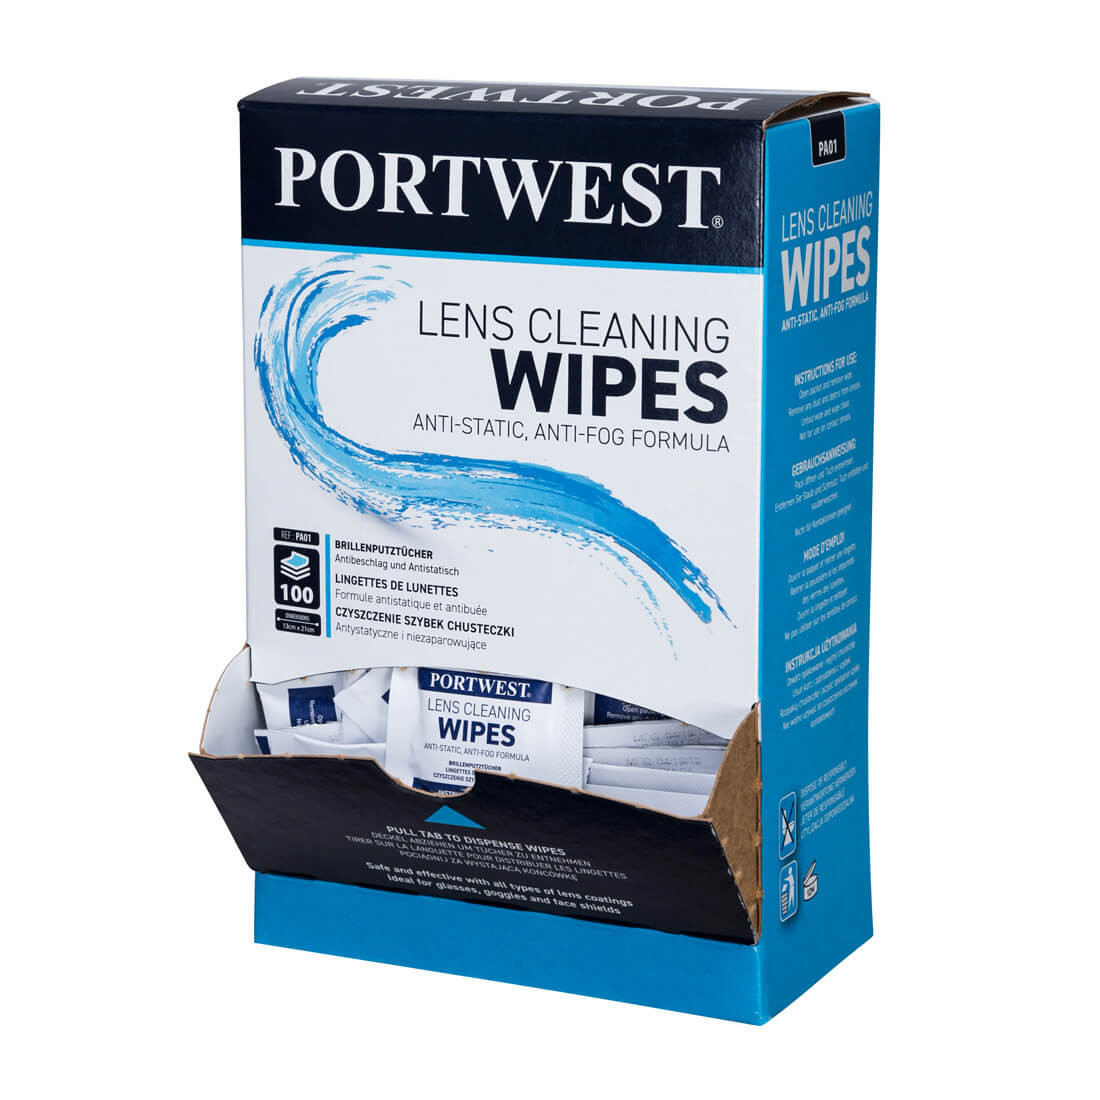 Lens Cleaning Towelettes - Personal protection